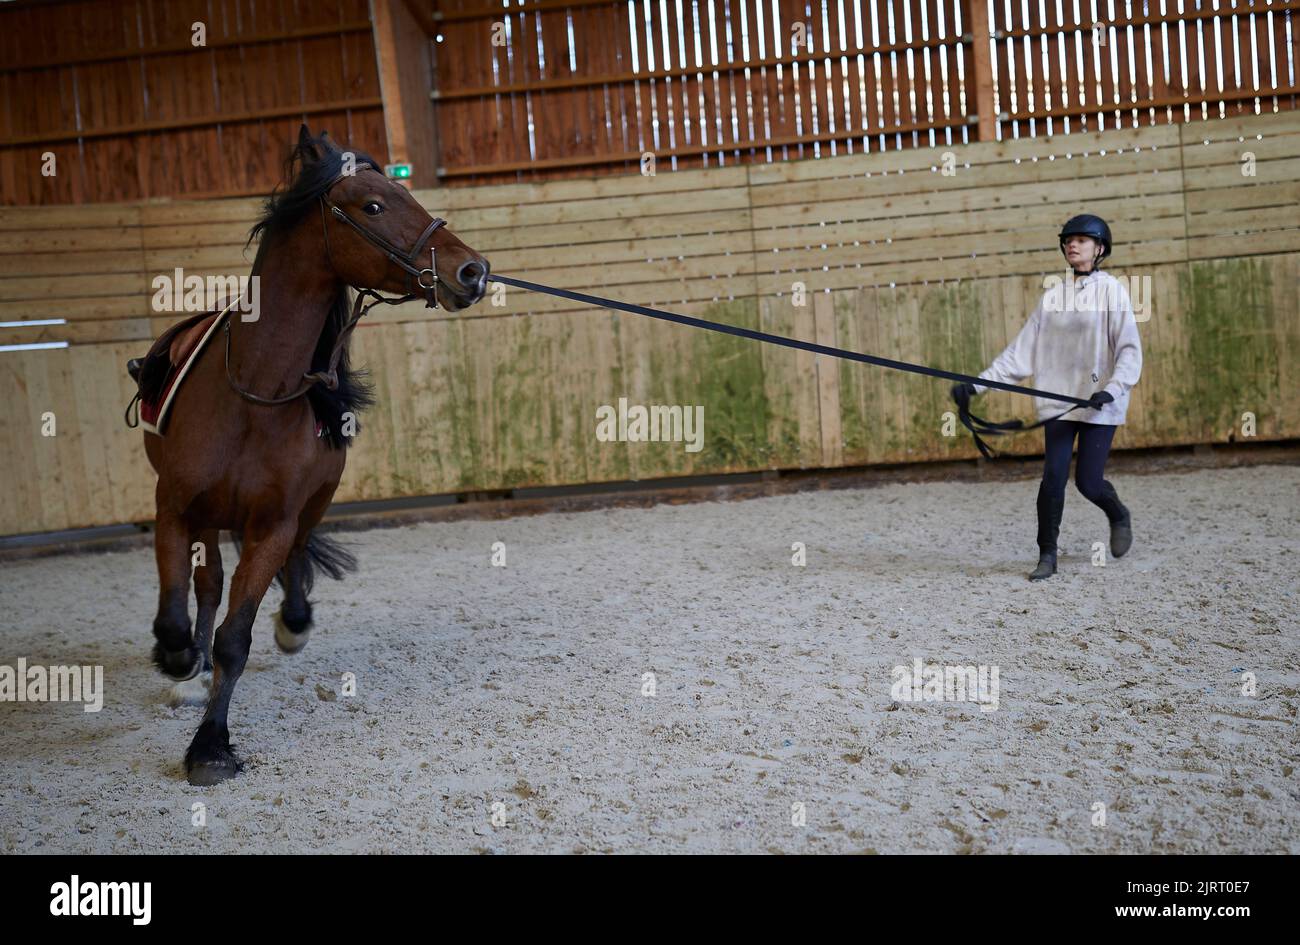 The equestrian centre of Mancy belongs to the agricultural college of Mancy. Horse-riding: young girl training with a horse, student of the agricultur Stock Photo